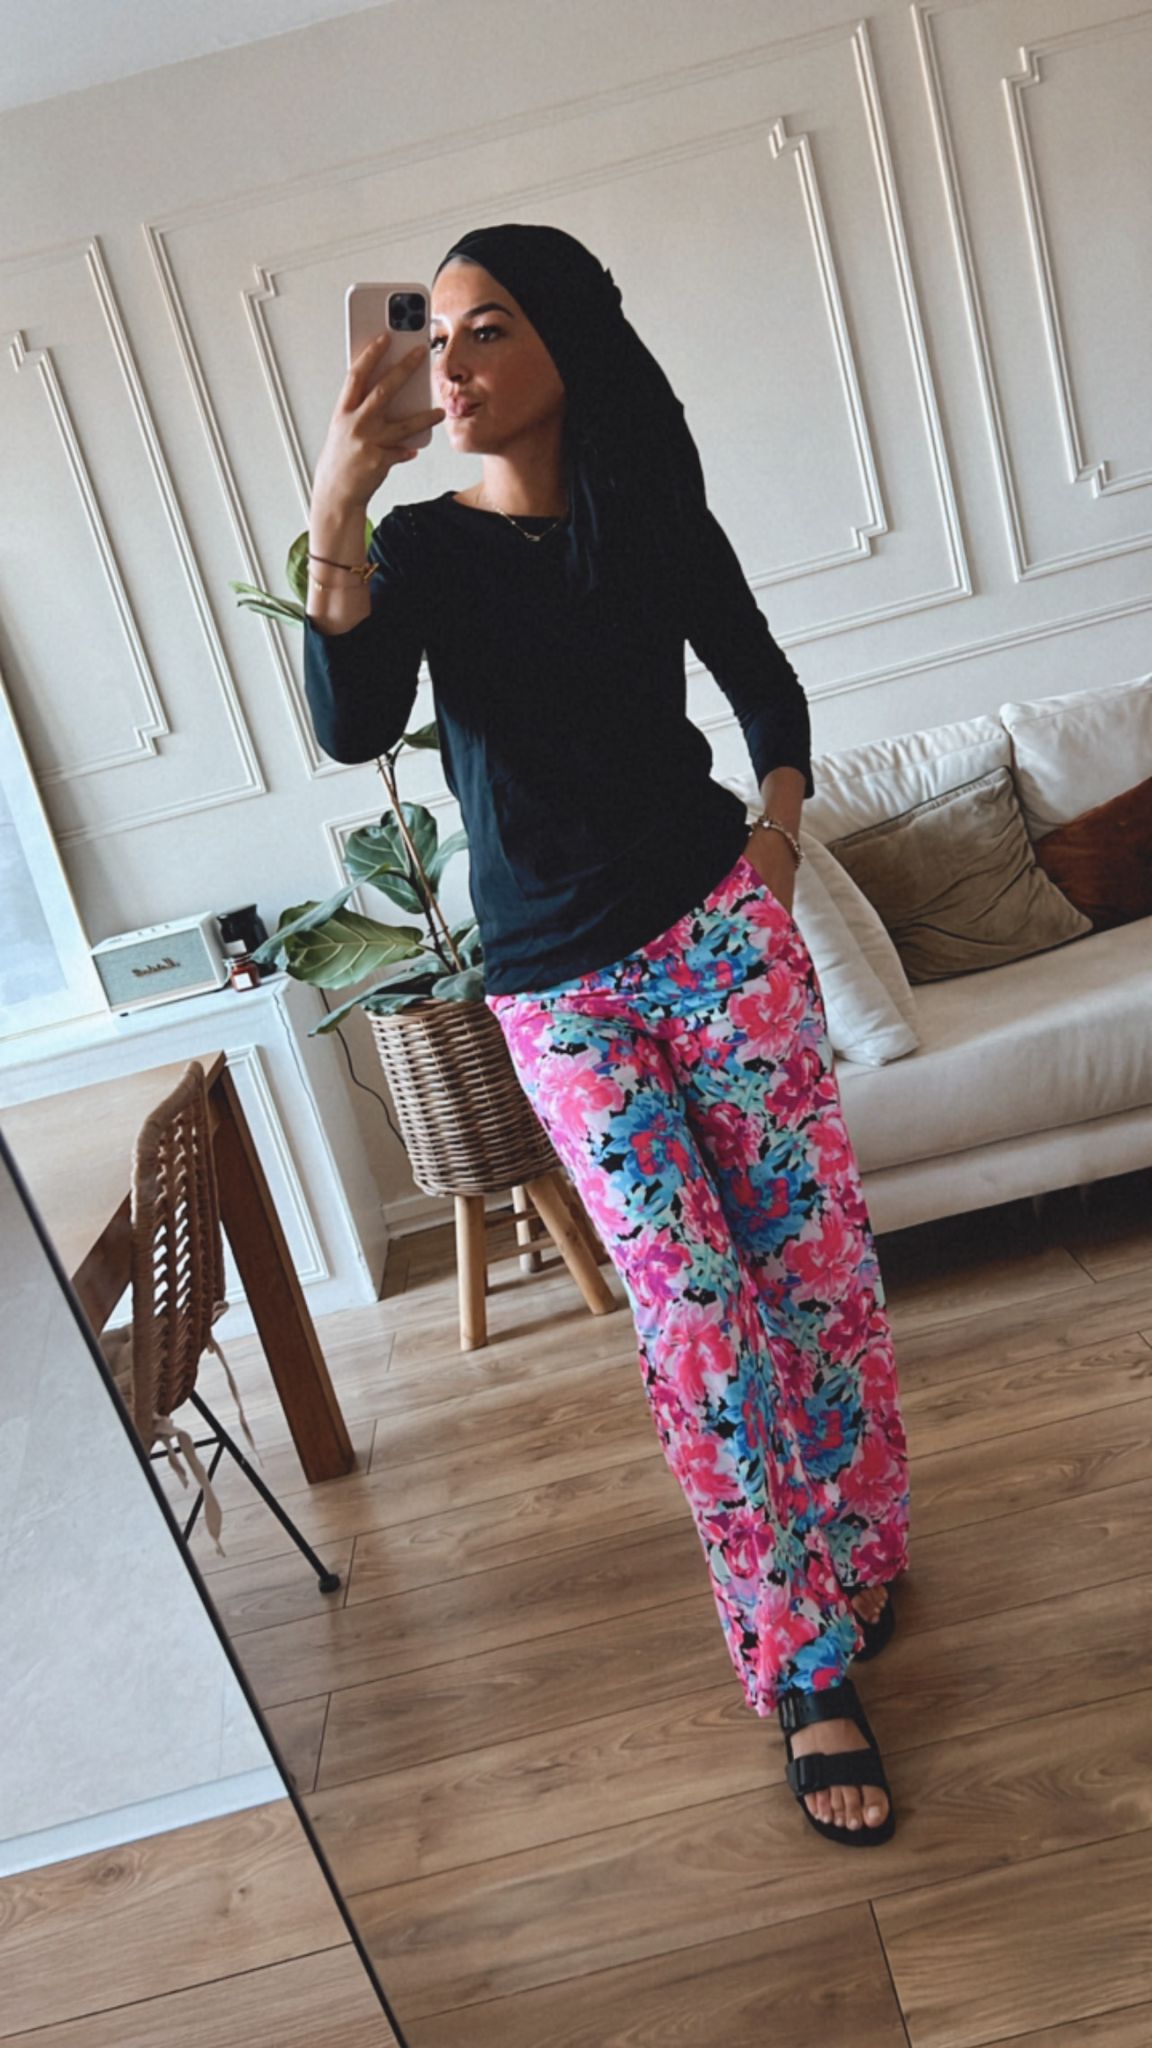 Pink floral trousers matched with an elegant black camisole